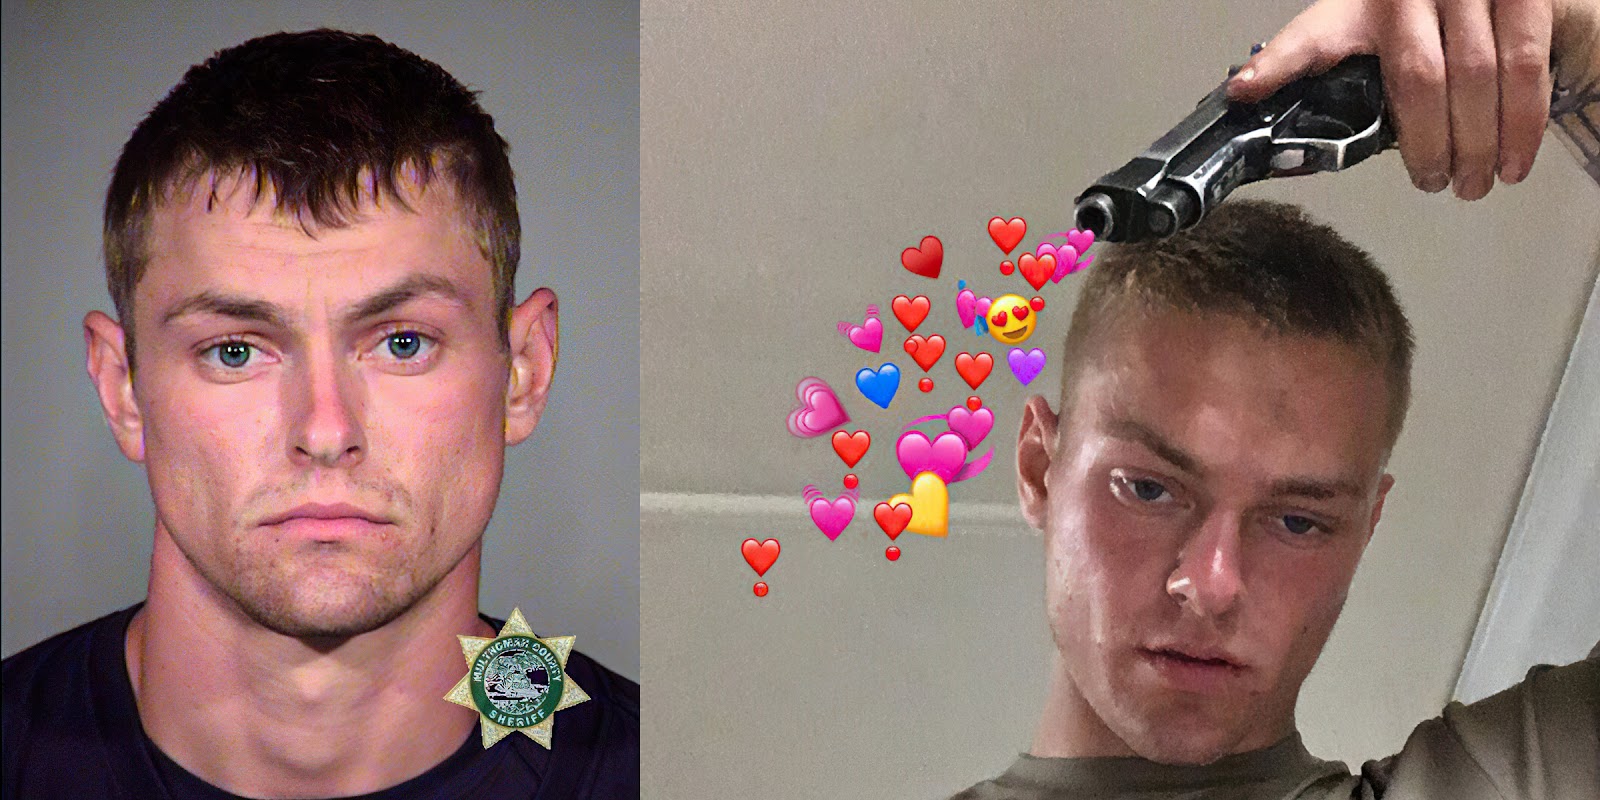 Ty John Fox was arrested at an Antifa riot in Portland in September 2020